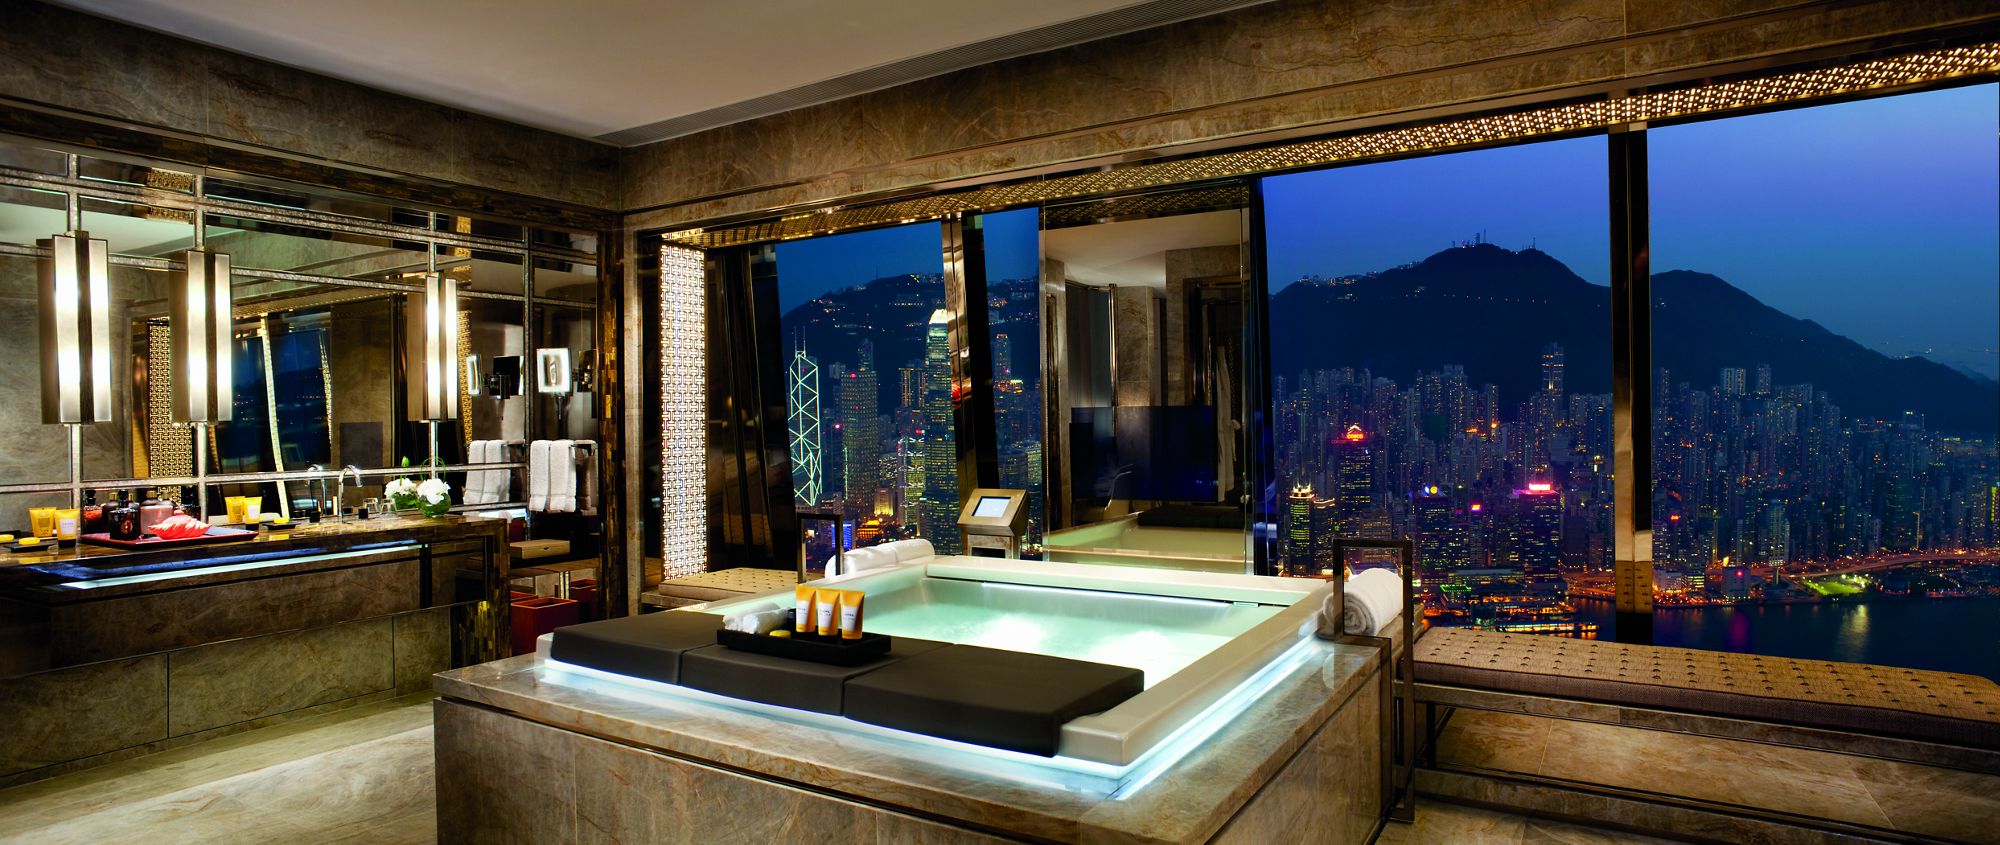 The Ultimate Bath' Is an Ode to the World's Most Luxurious Bathrooms